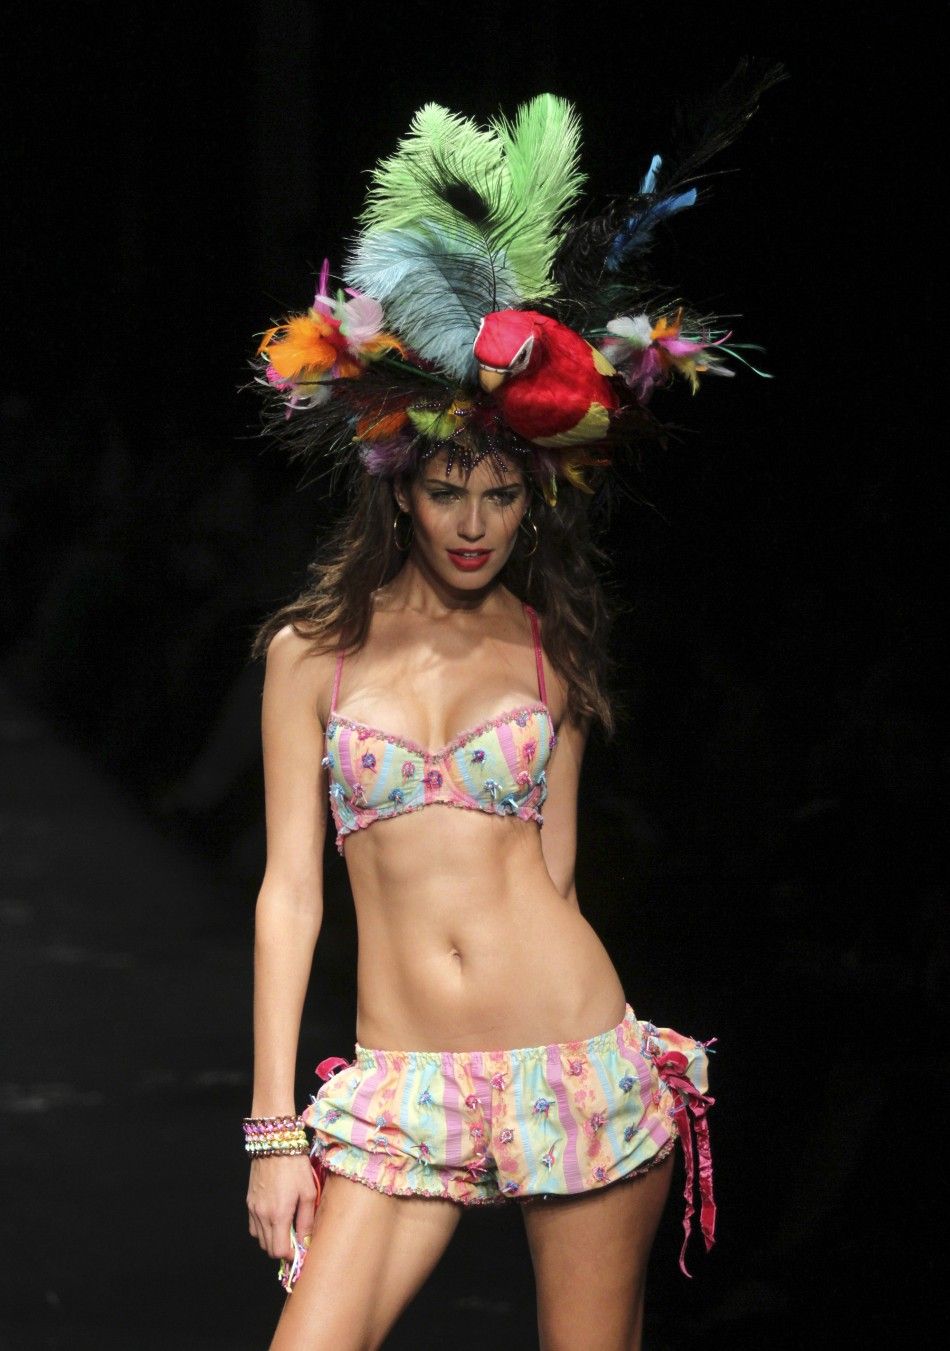 Sizzling Images of Models at Columbian Lingerie Fashion Show.